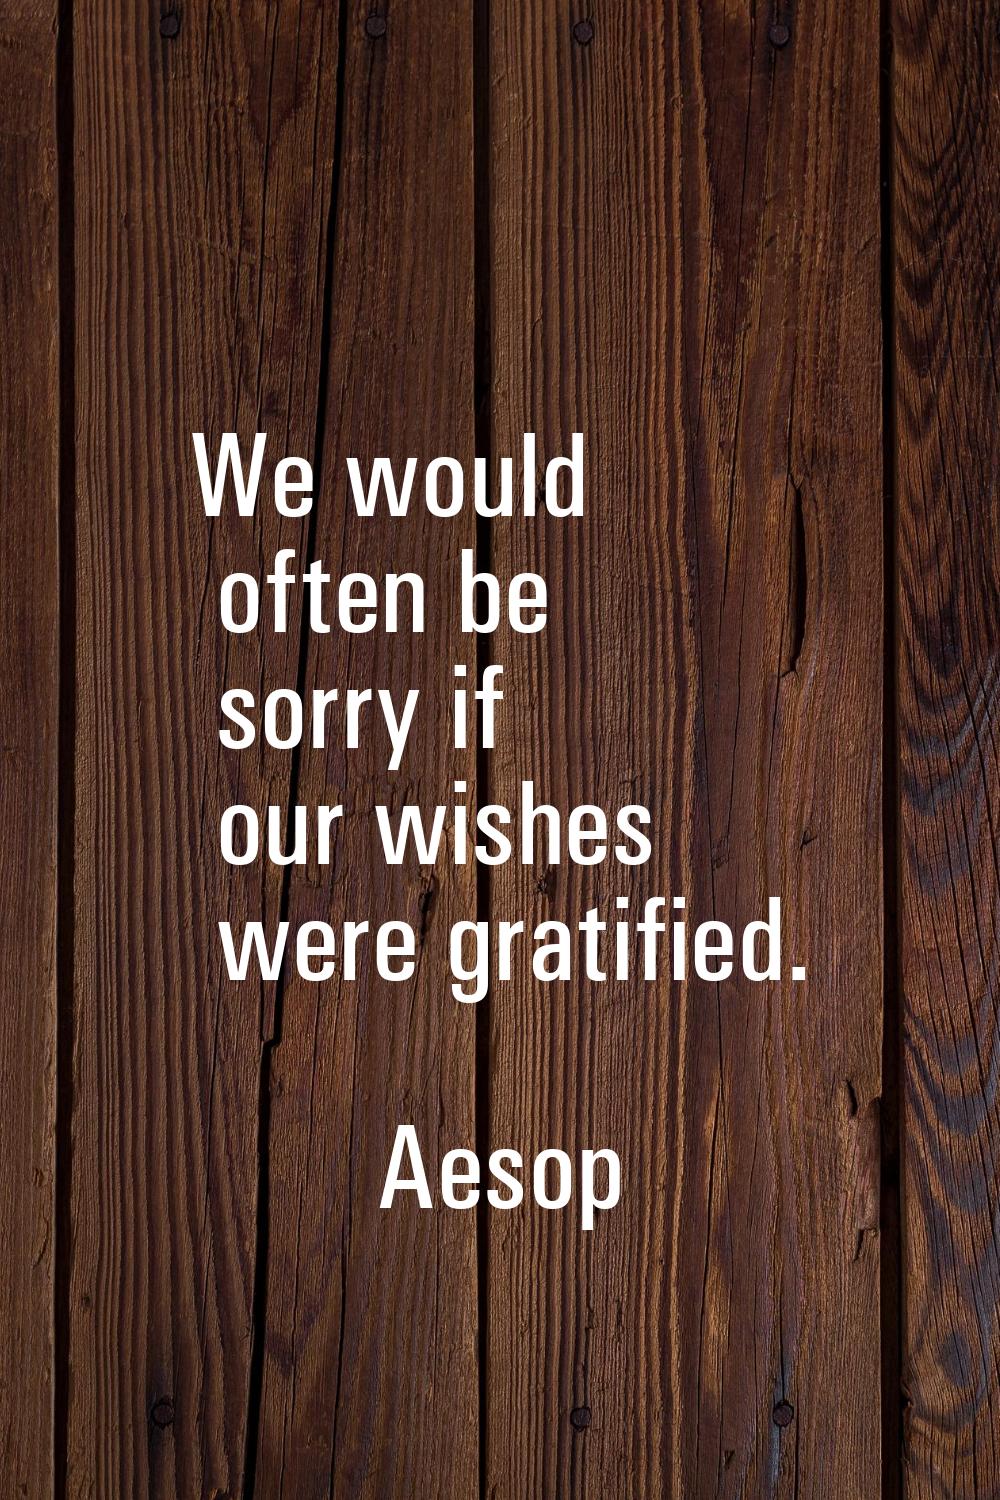 We would often be sorry if our wishes were gratified.